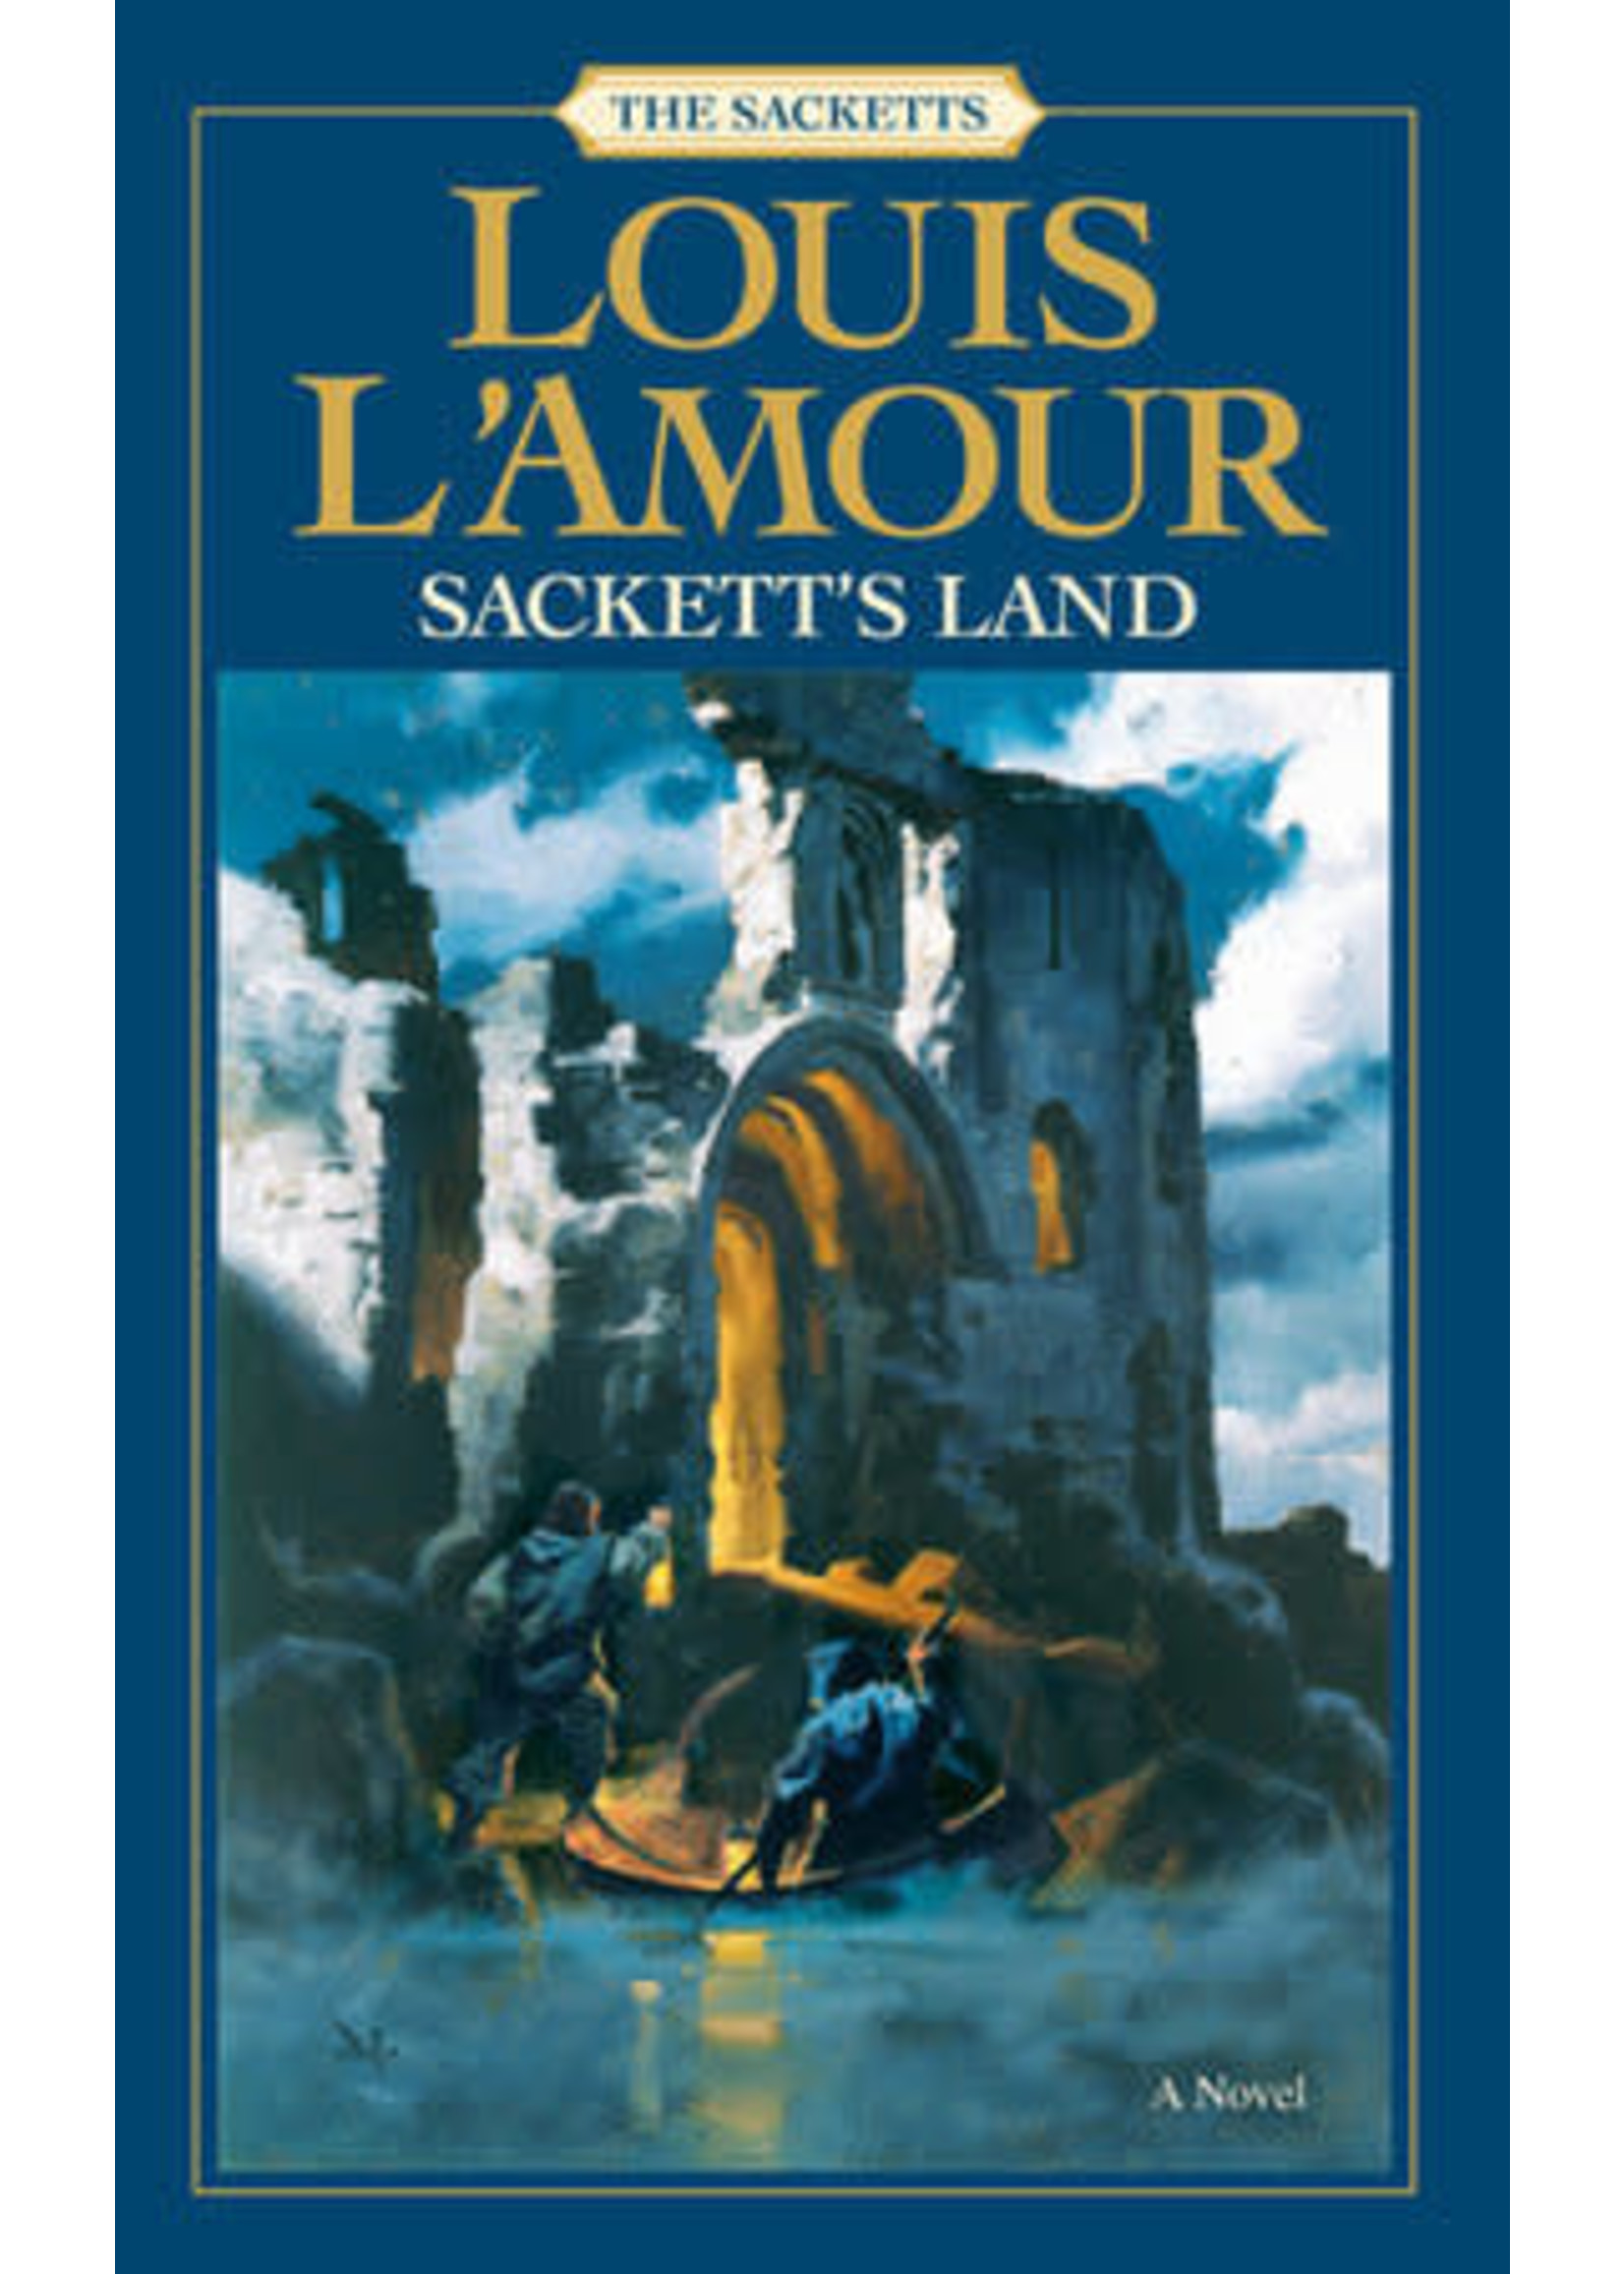 Sackett's Land (The Sacketts #1) by Louis L'Amour